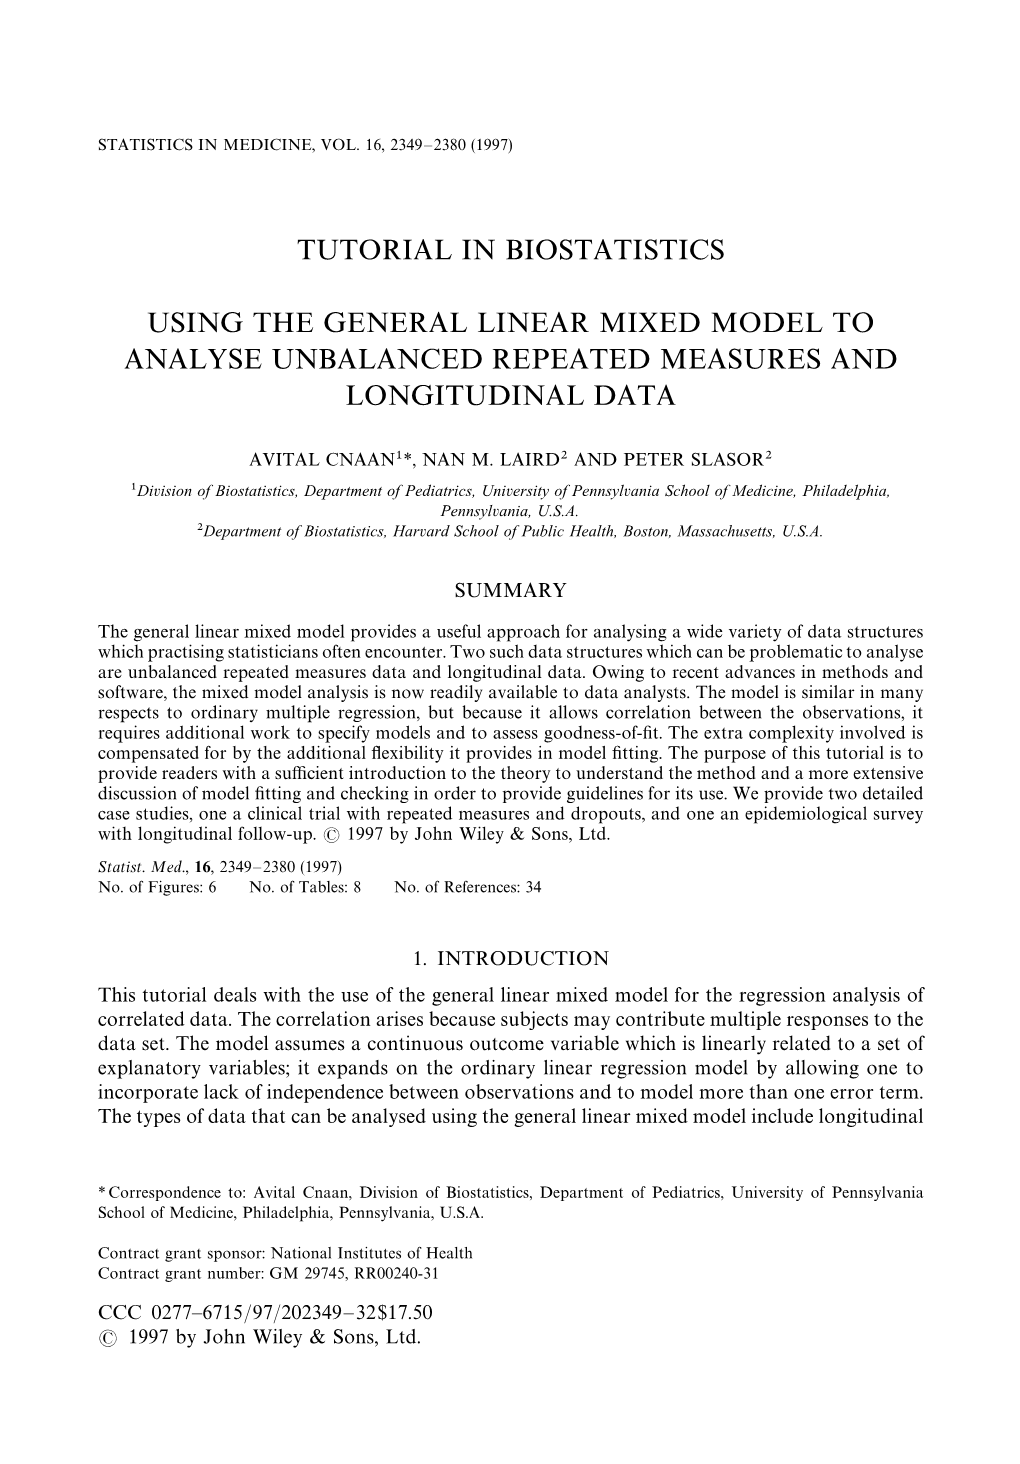 Tutorial in Biostatistics Using the General Linear Mixed Model To